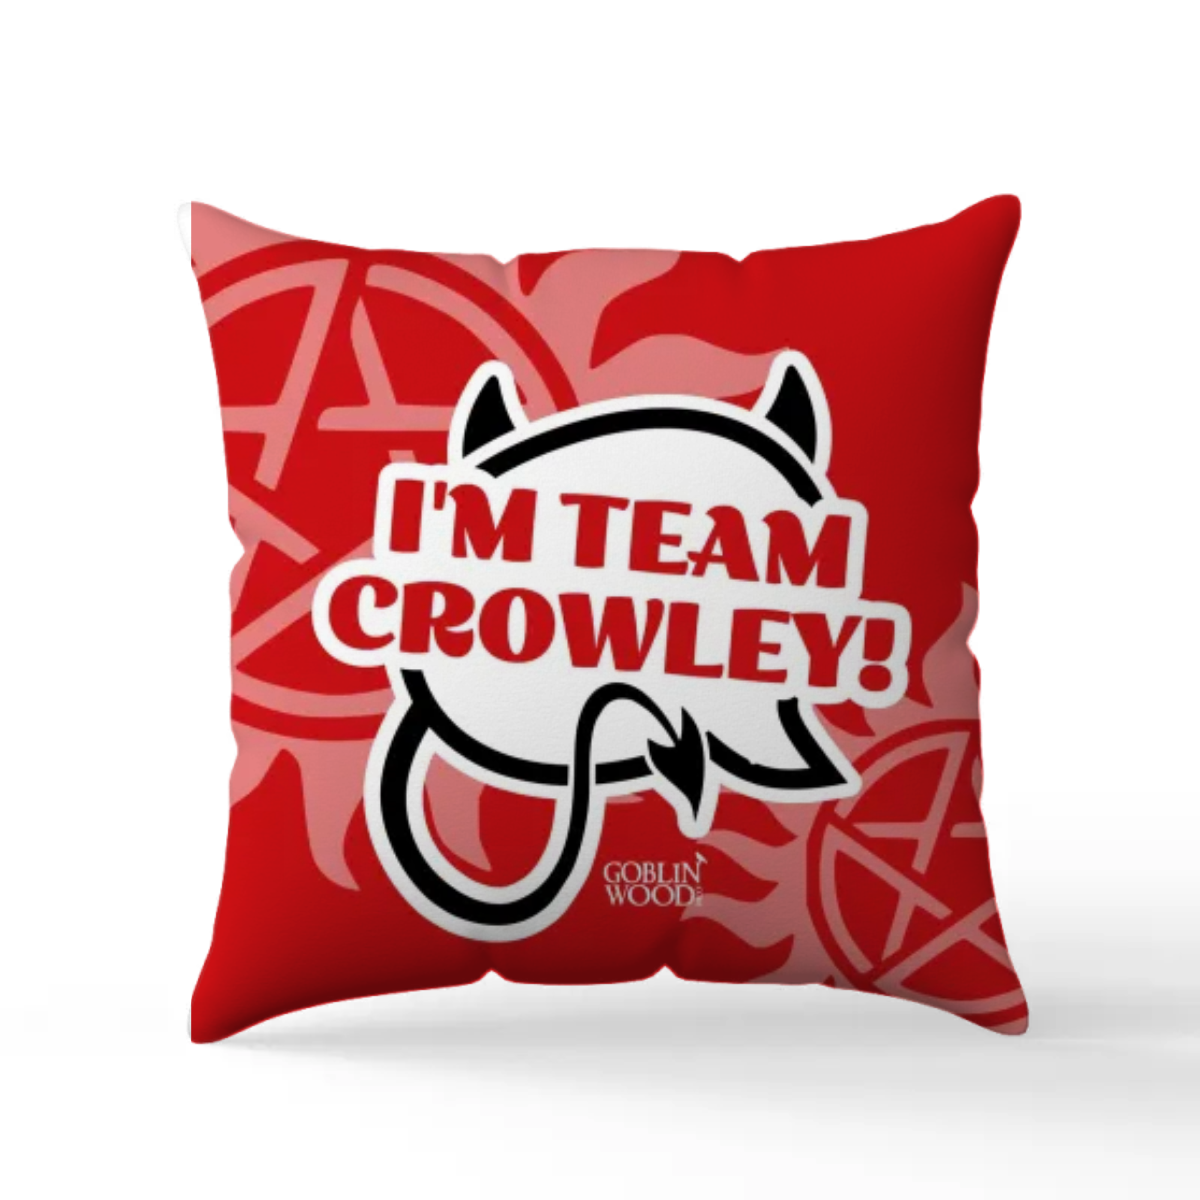 I'm Team Crowley! Speech Bubble Scatter Cushion - Supernatural Inspired - Goblin Wood Exclusive